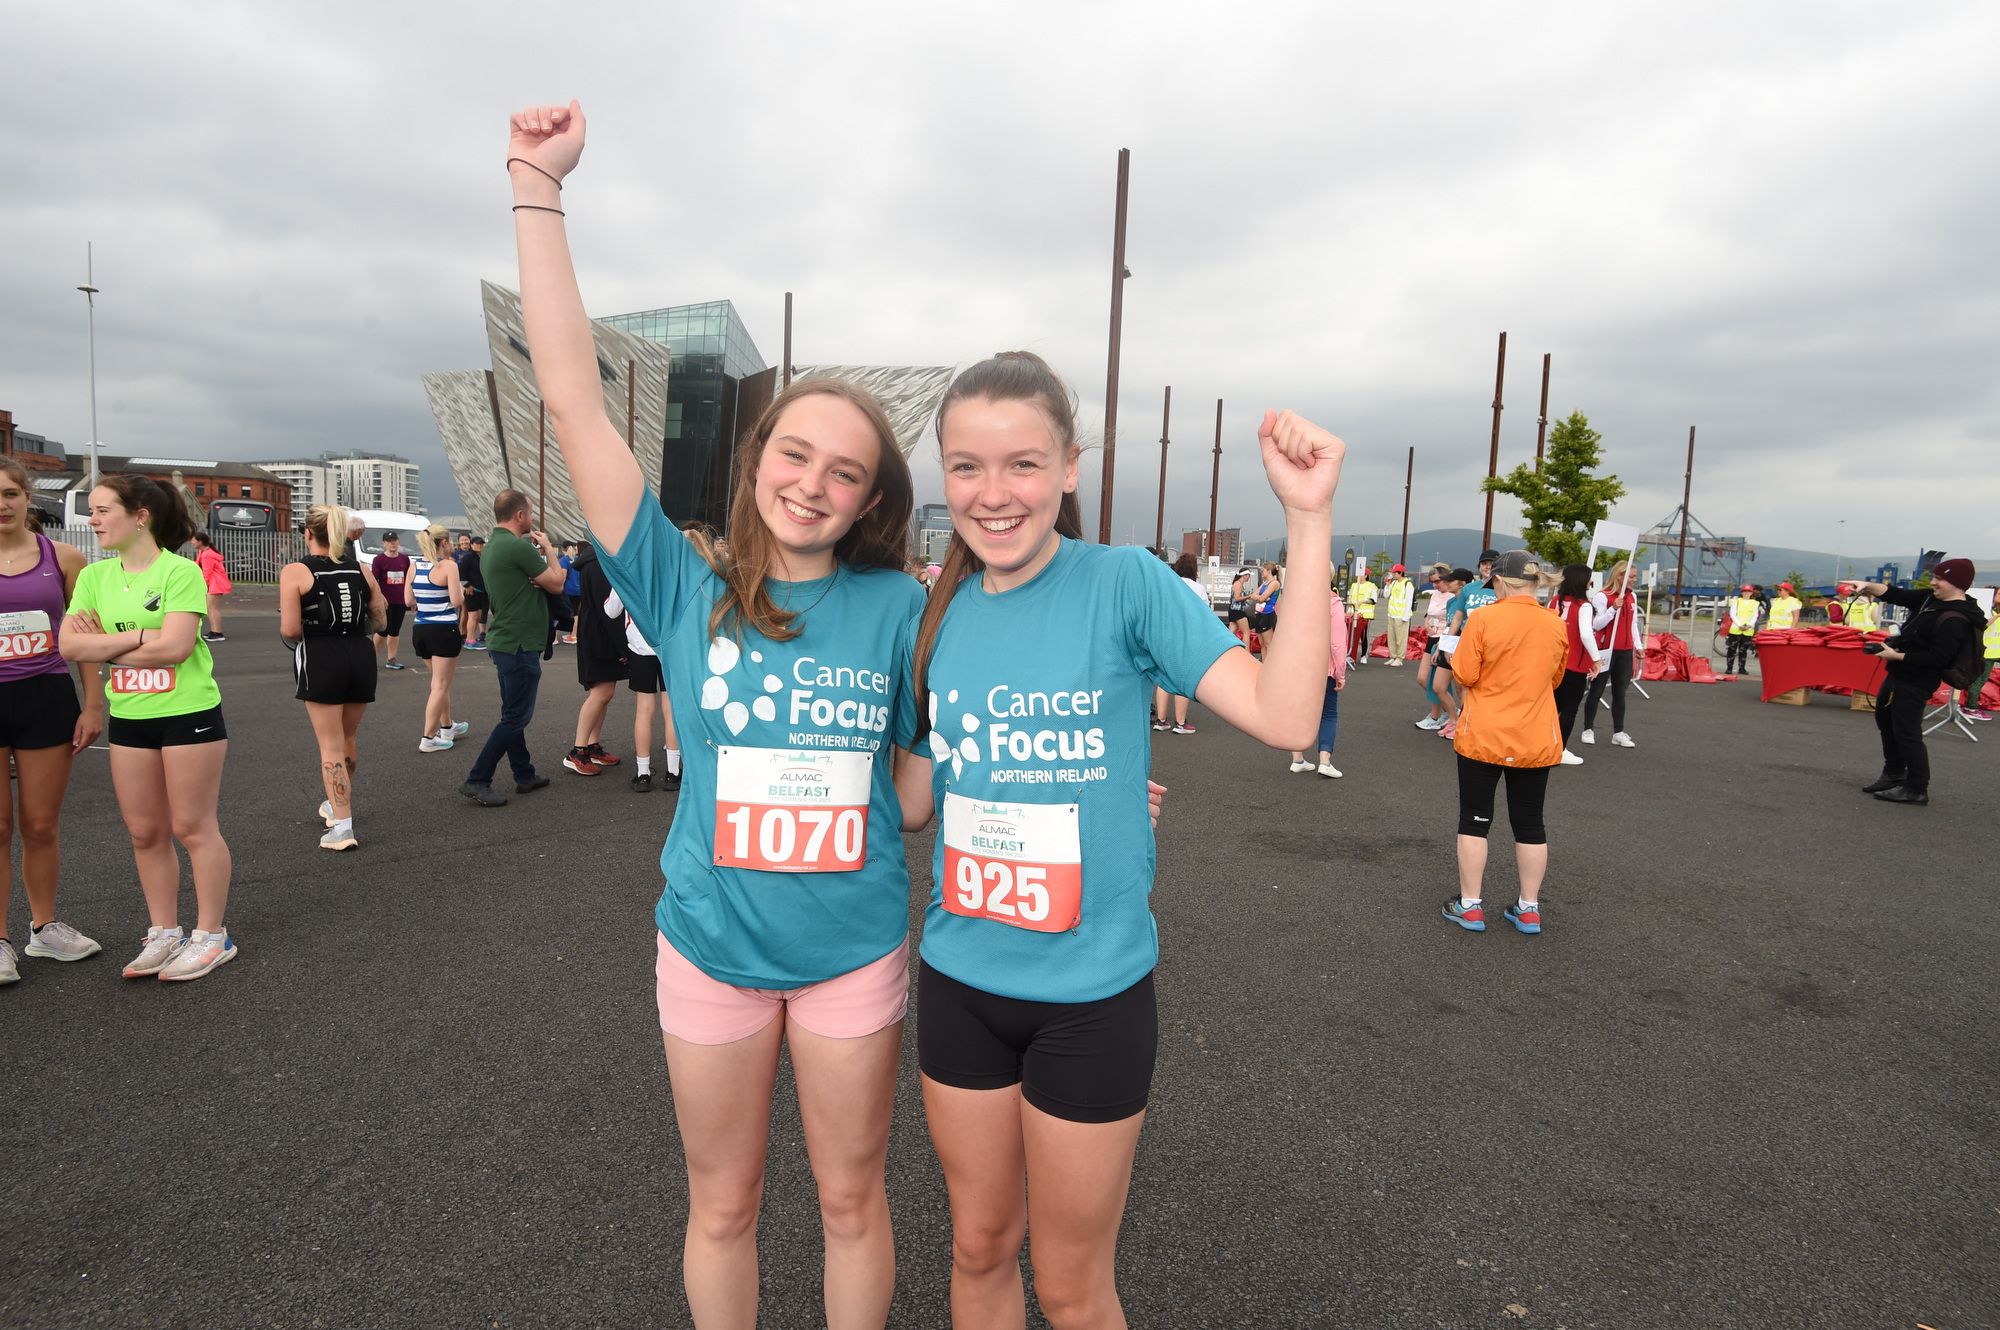 Start fundraising or make a donation to Cancer Focus NI